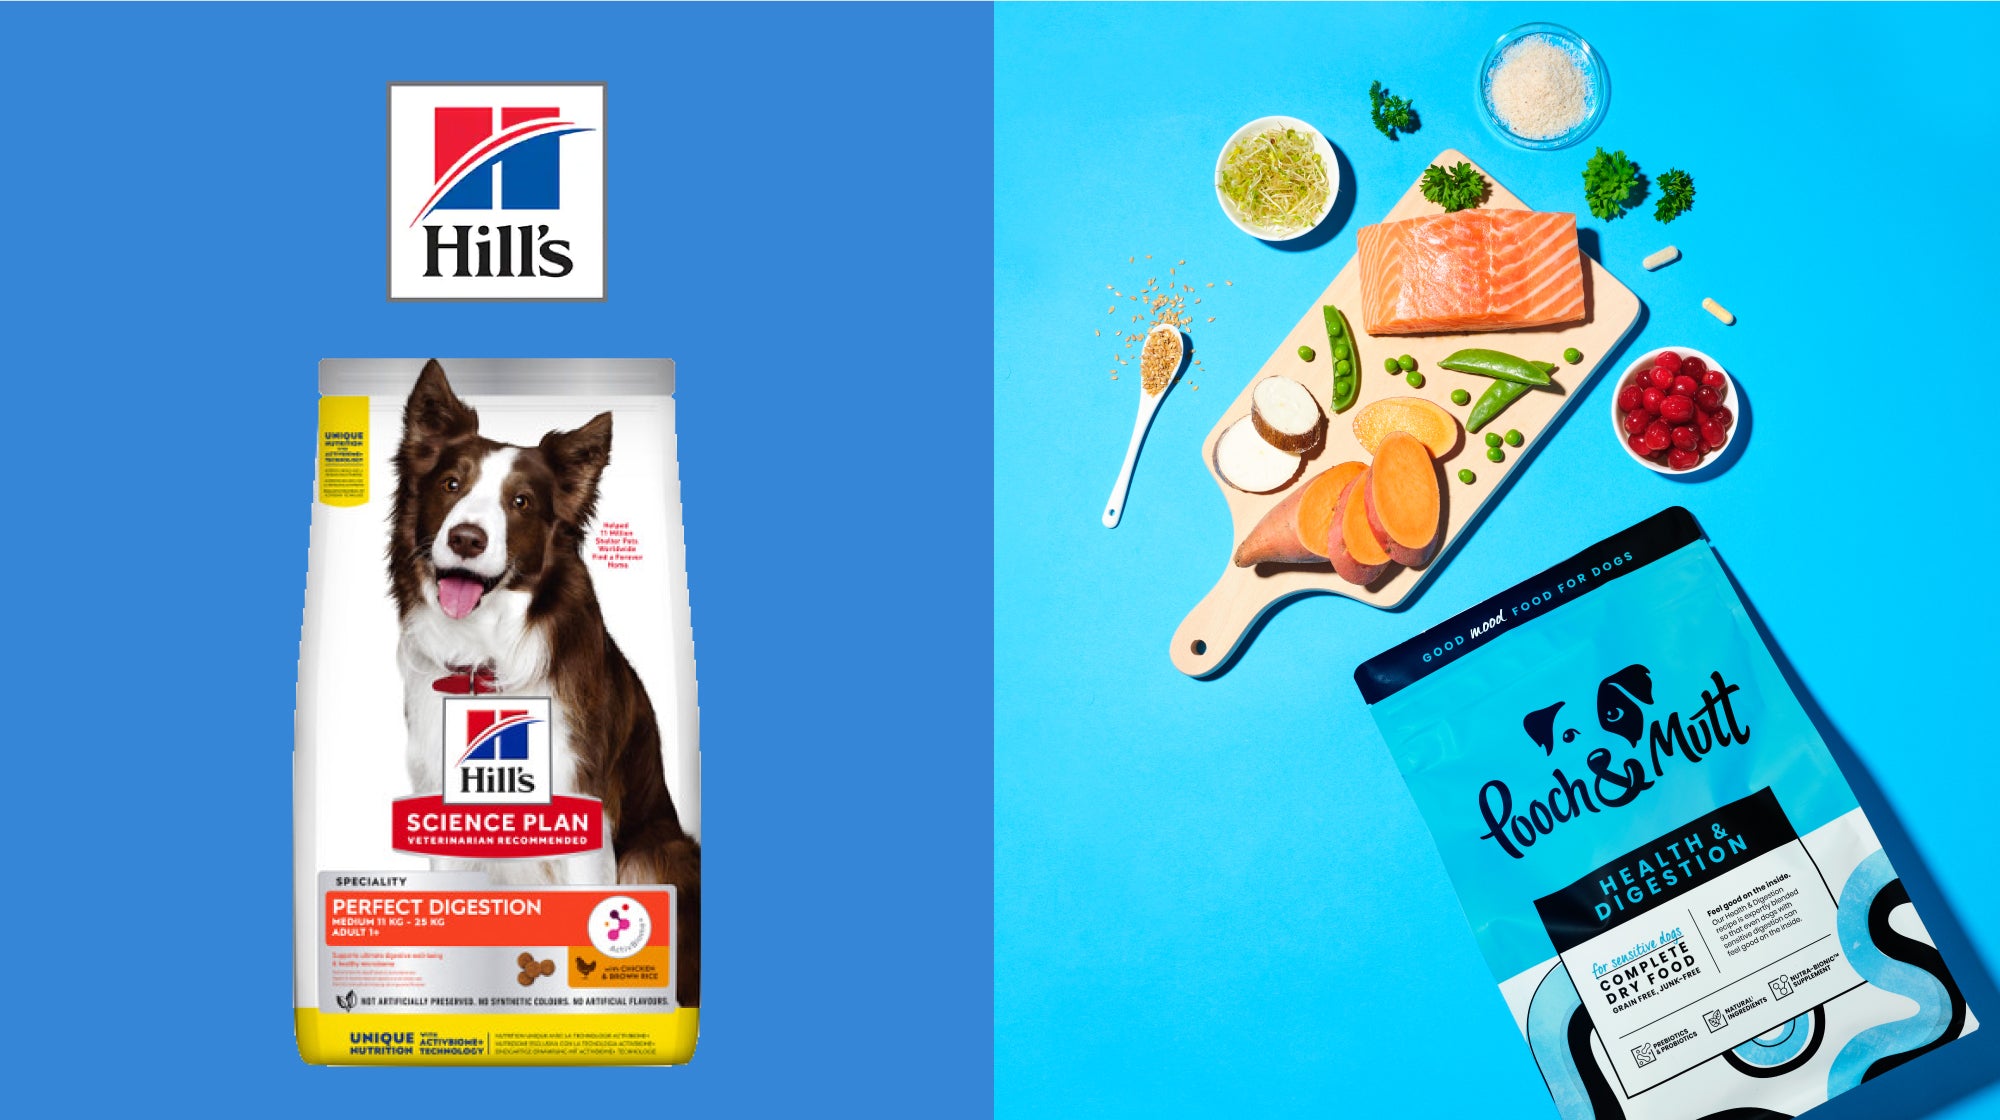 Hills science plan prefect digestion adult vs Pooch & mutt health and digestion dry food